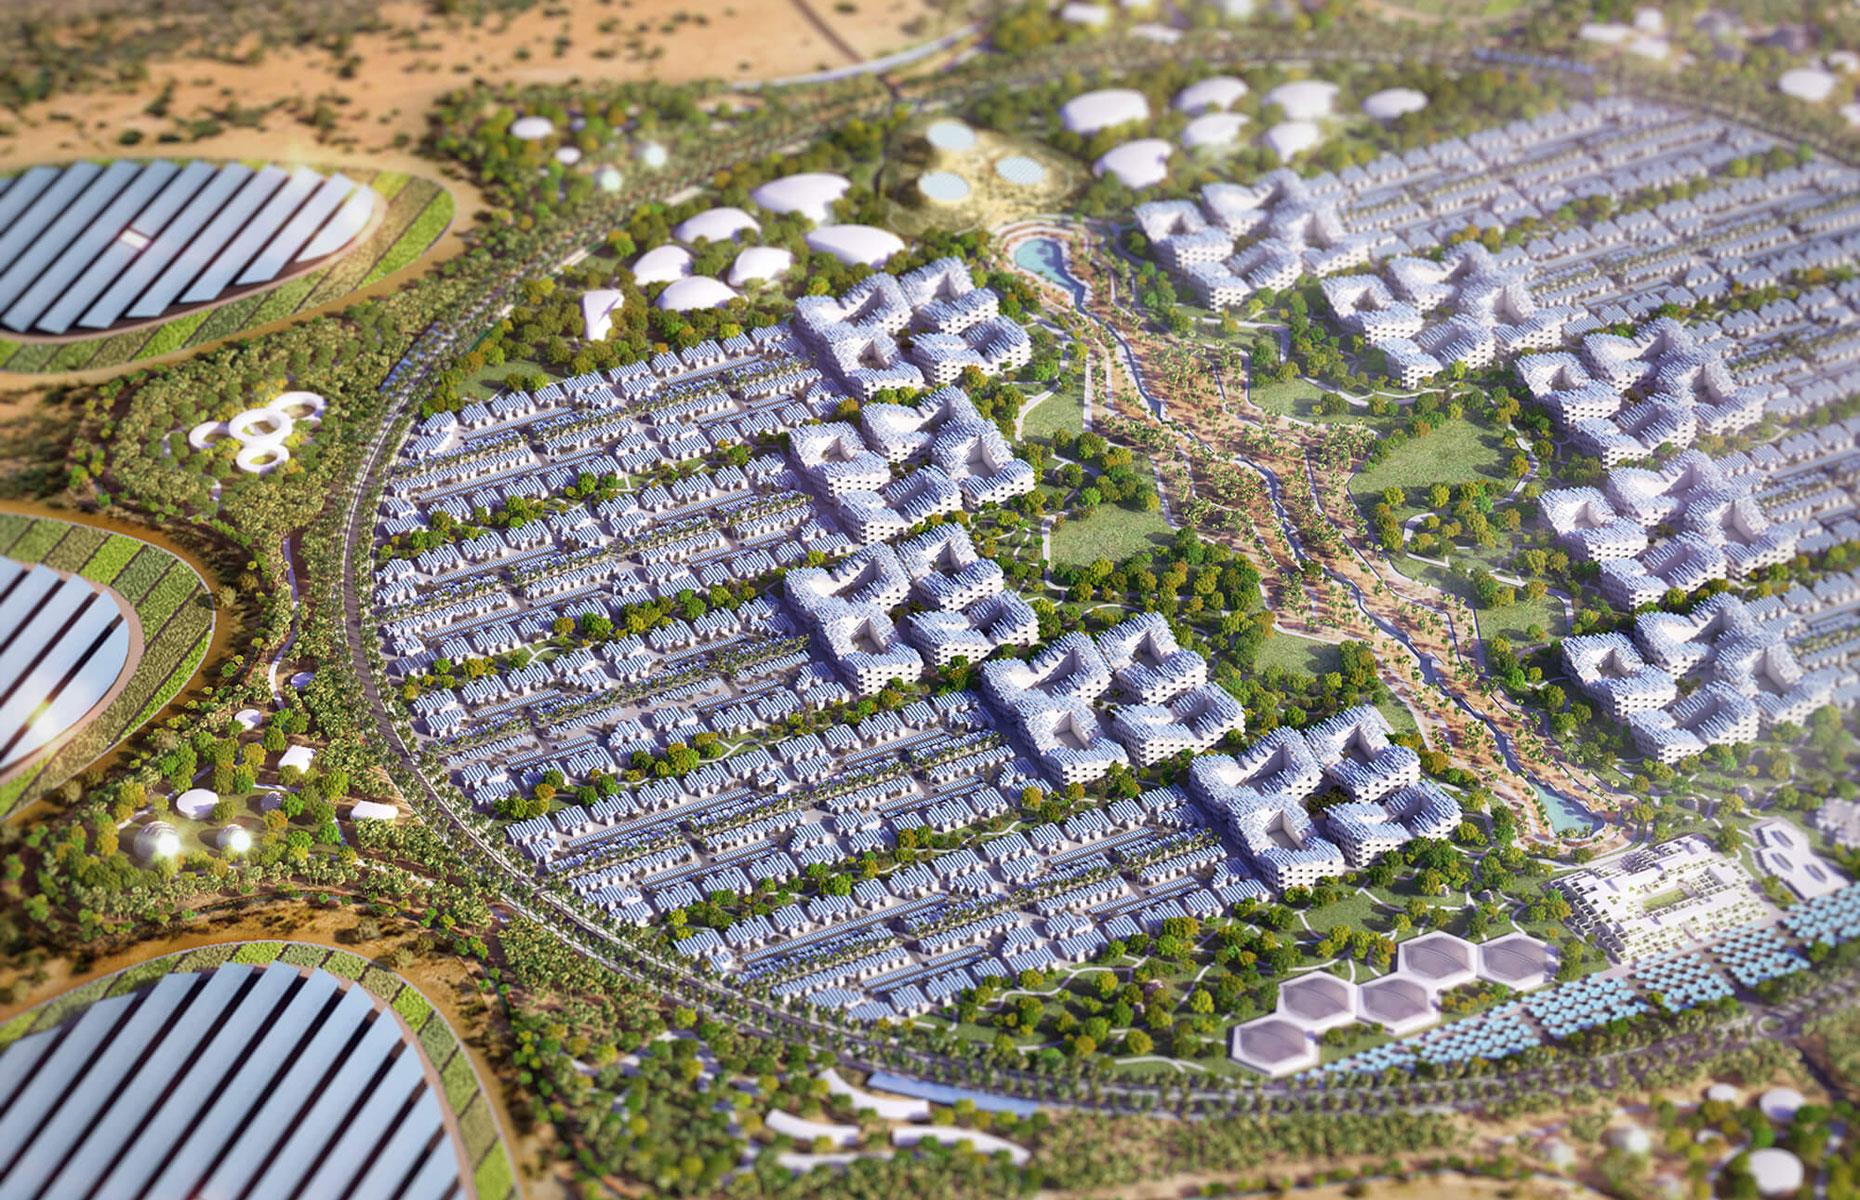 <p>Around a third smaller than XZero City with a footprint of 1,433 acres and a projected population of 35,000, Nexgen Sustainable City will nonetheless pack a serious eco punch. There's significant space given over to solar power generation, as well as high-tech farms that promote innovative agriculture practices. </p>